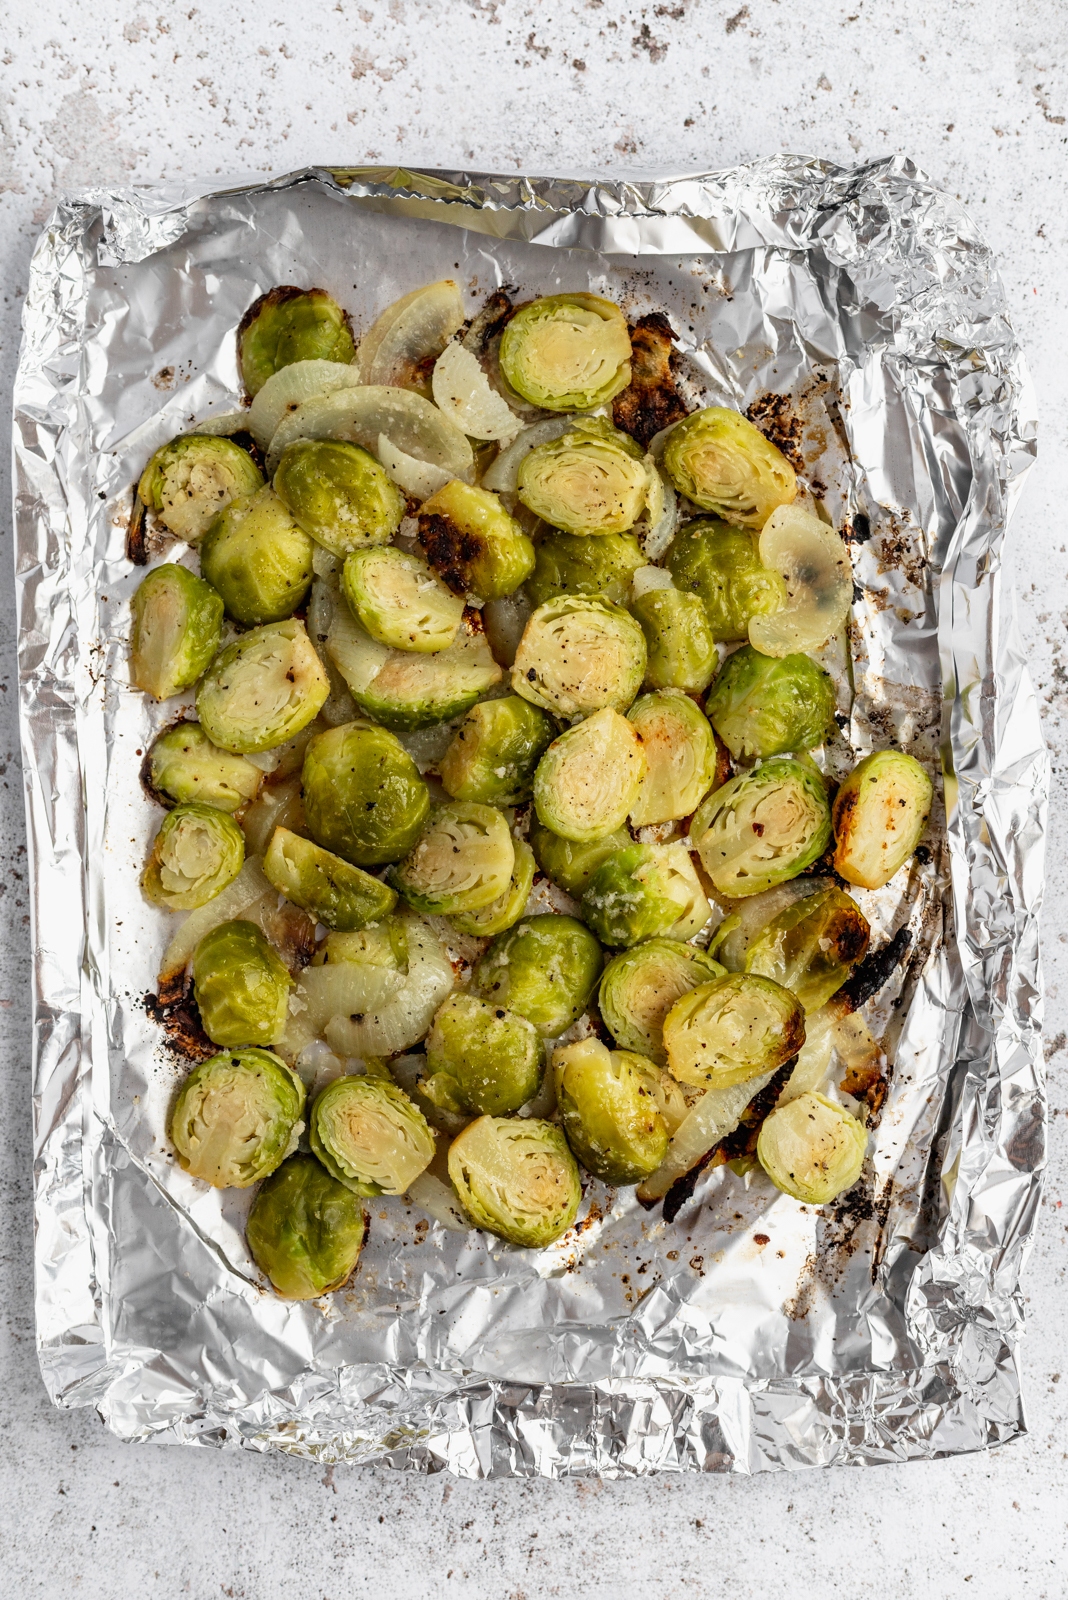 grilled brussels sprouts in a foil pack